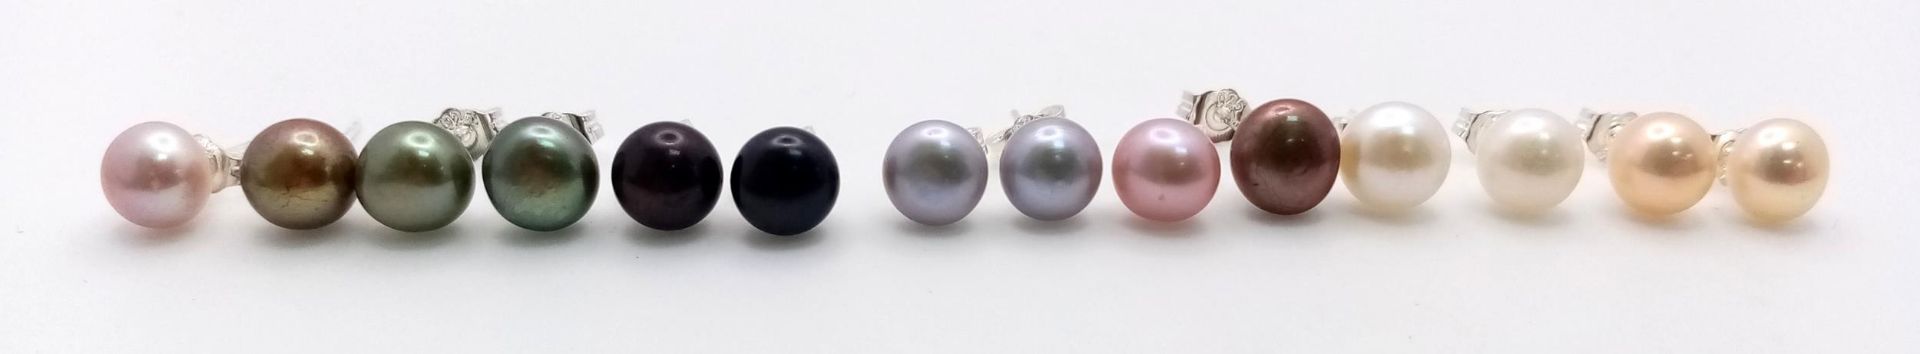 Seven Pairs of Freshwater Pearl Stud Earrings - Pastel Coloured and set in 925 silver.